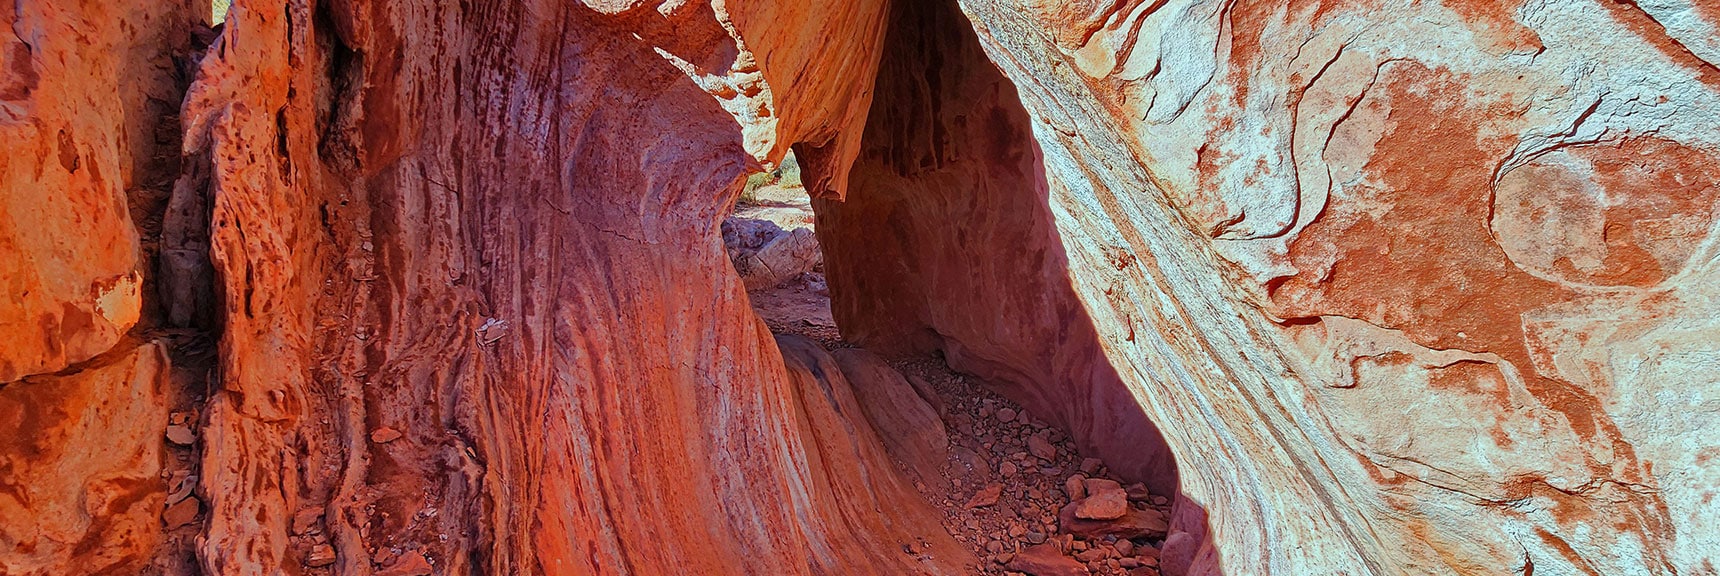 Artistic Sculpted Passage Through the Rock Formation | Lower Calico Hills Loop | Calico Basin & Red Rock Canyon, Nevada